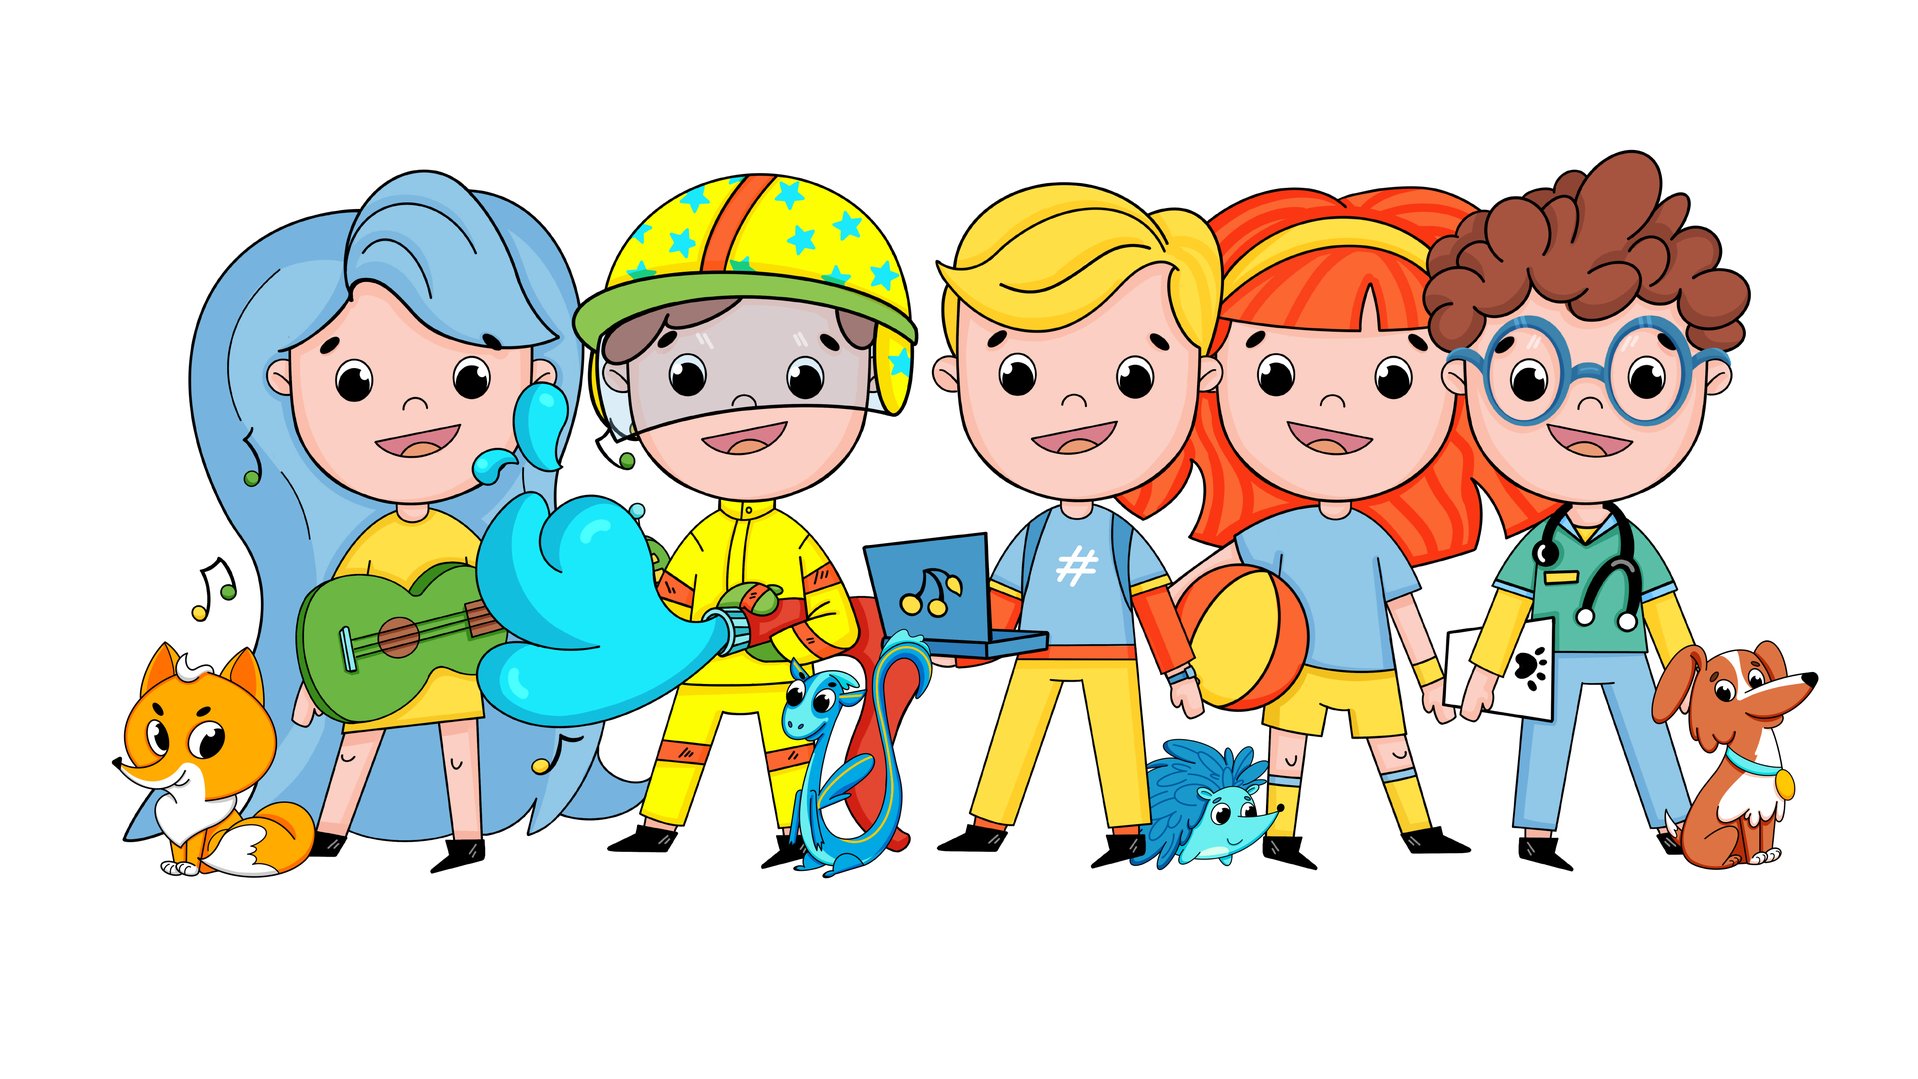 War Child's Can't Wait to Learn - characters of the Ukrainian app